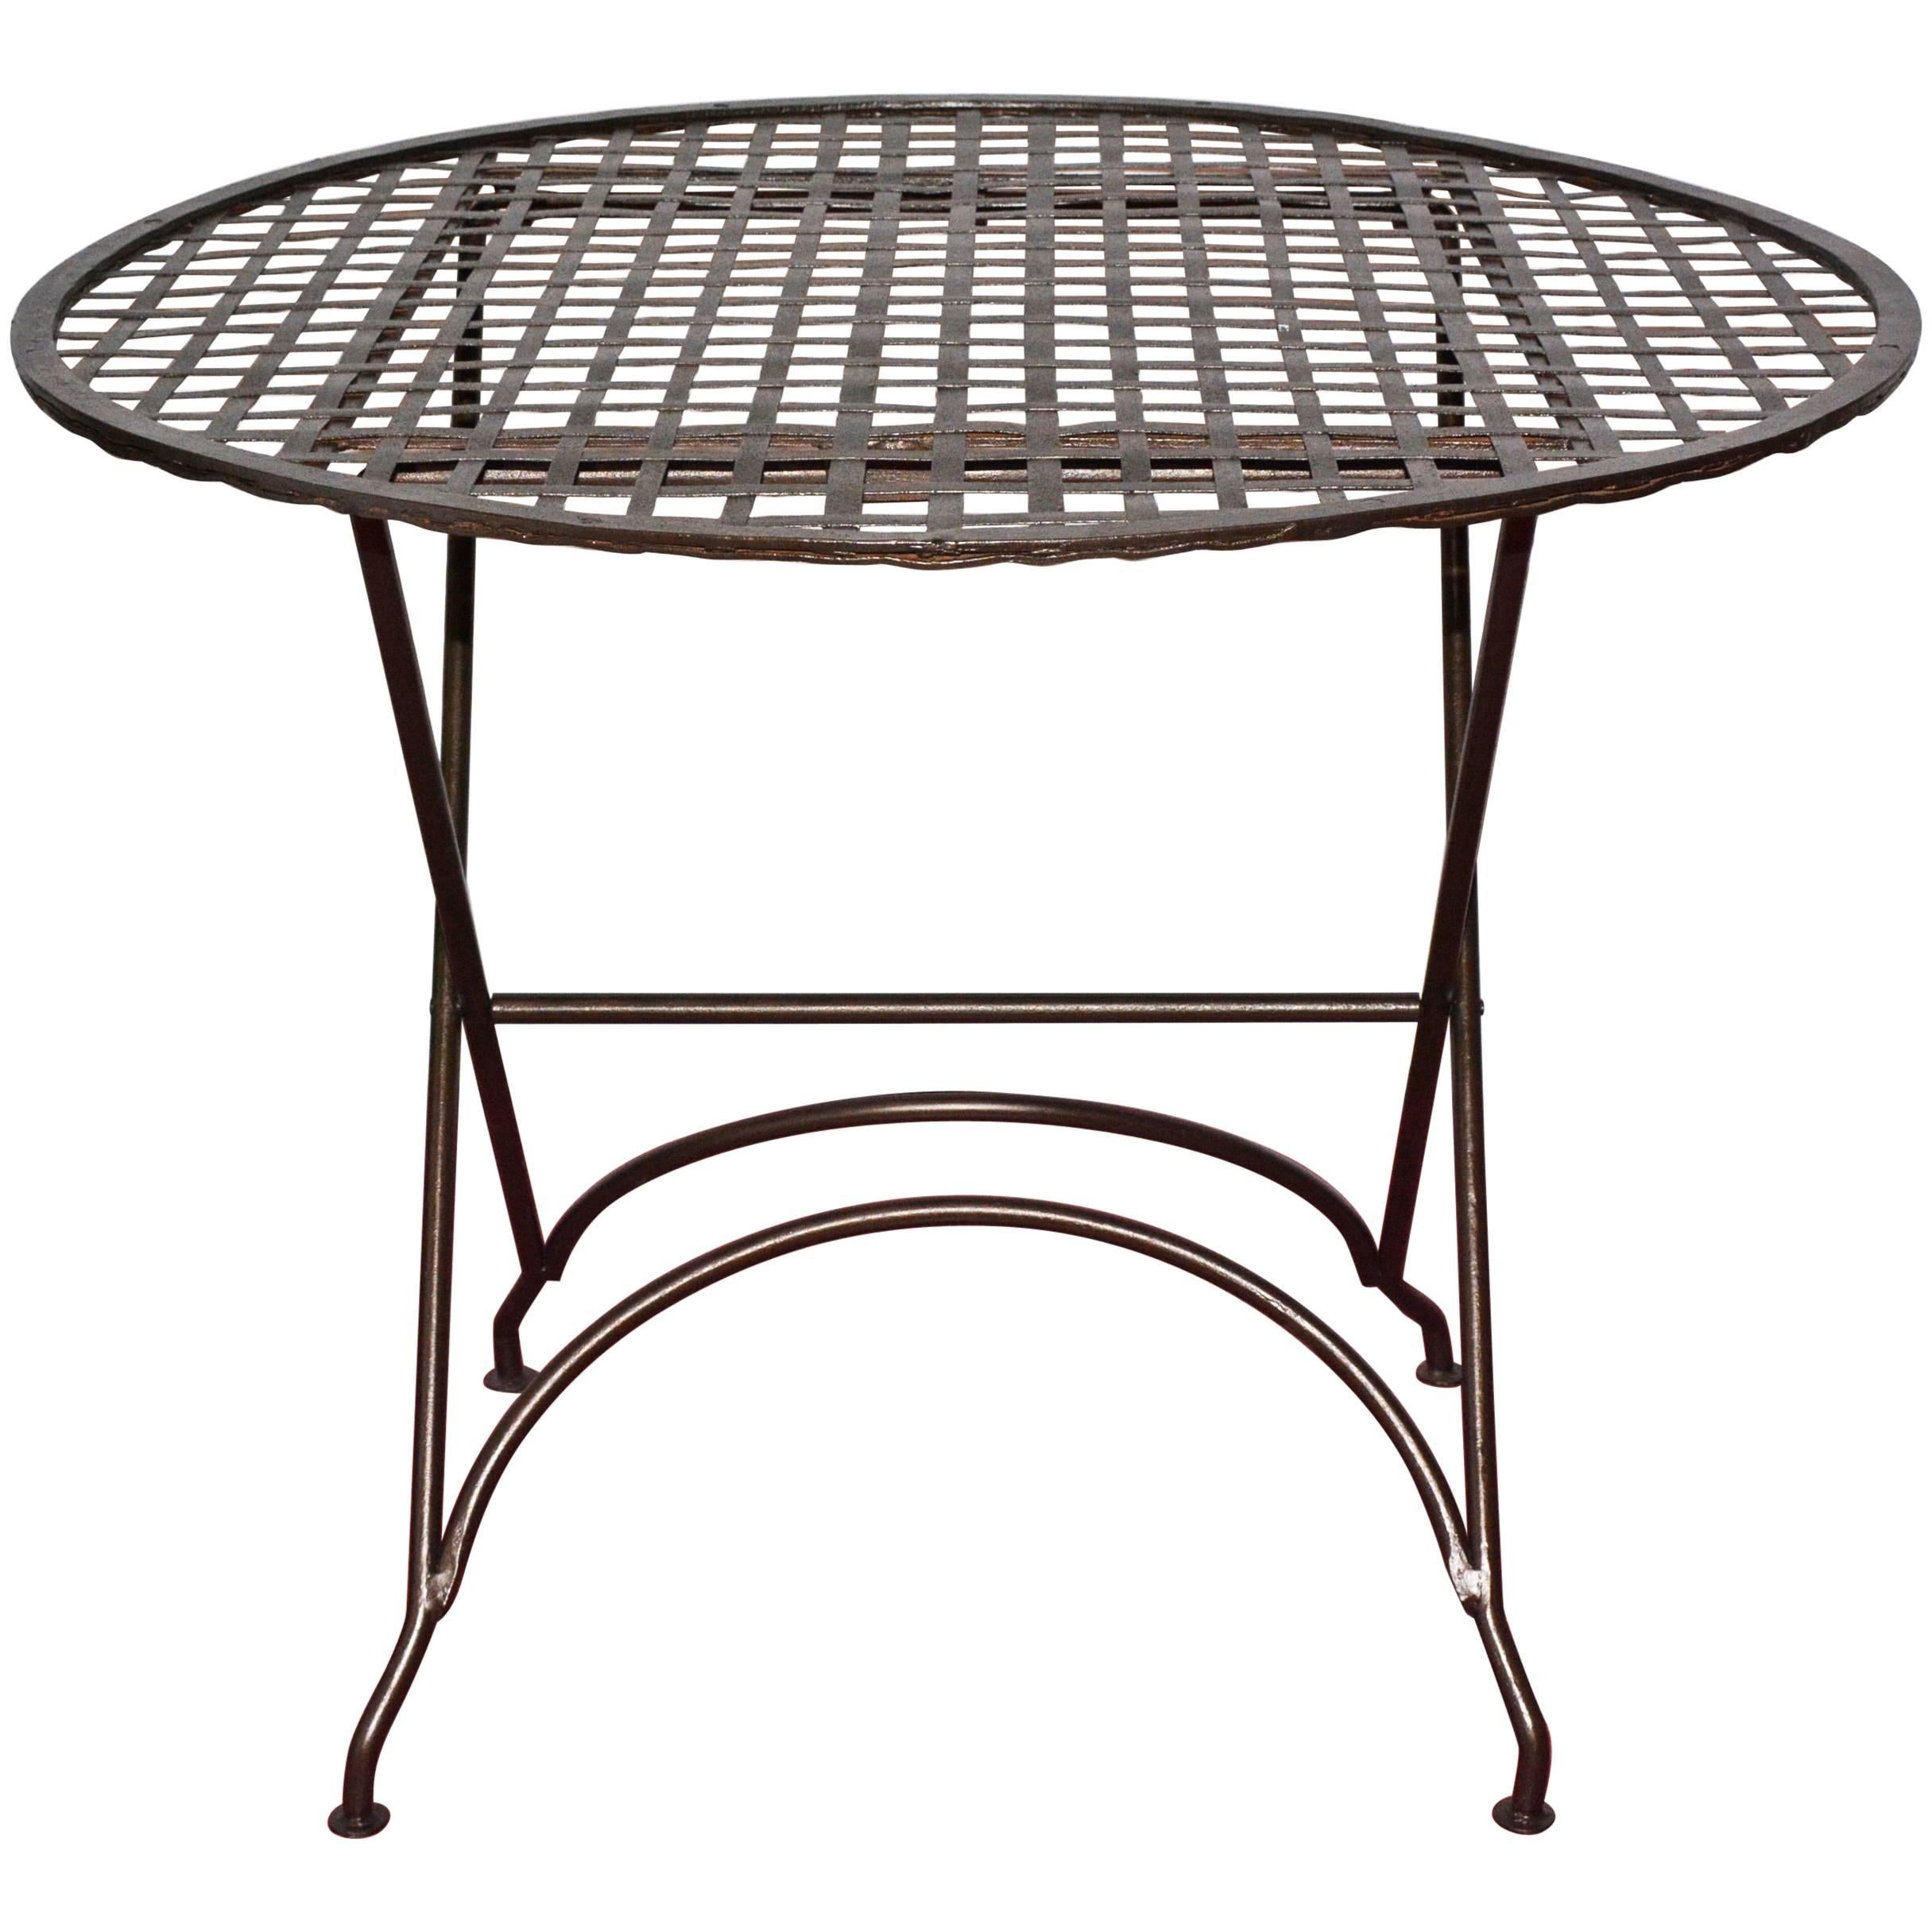 French Folding Bistro Table